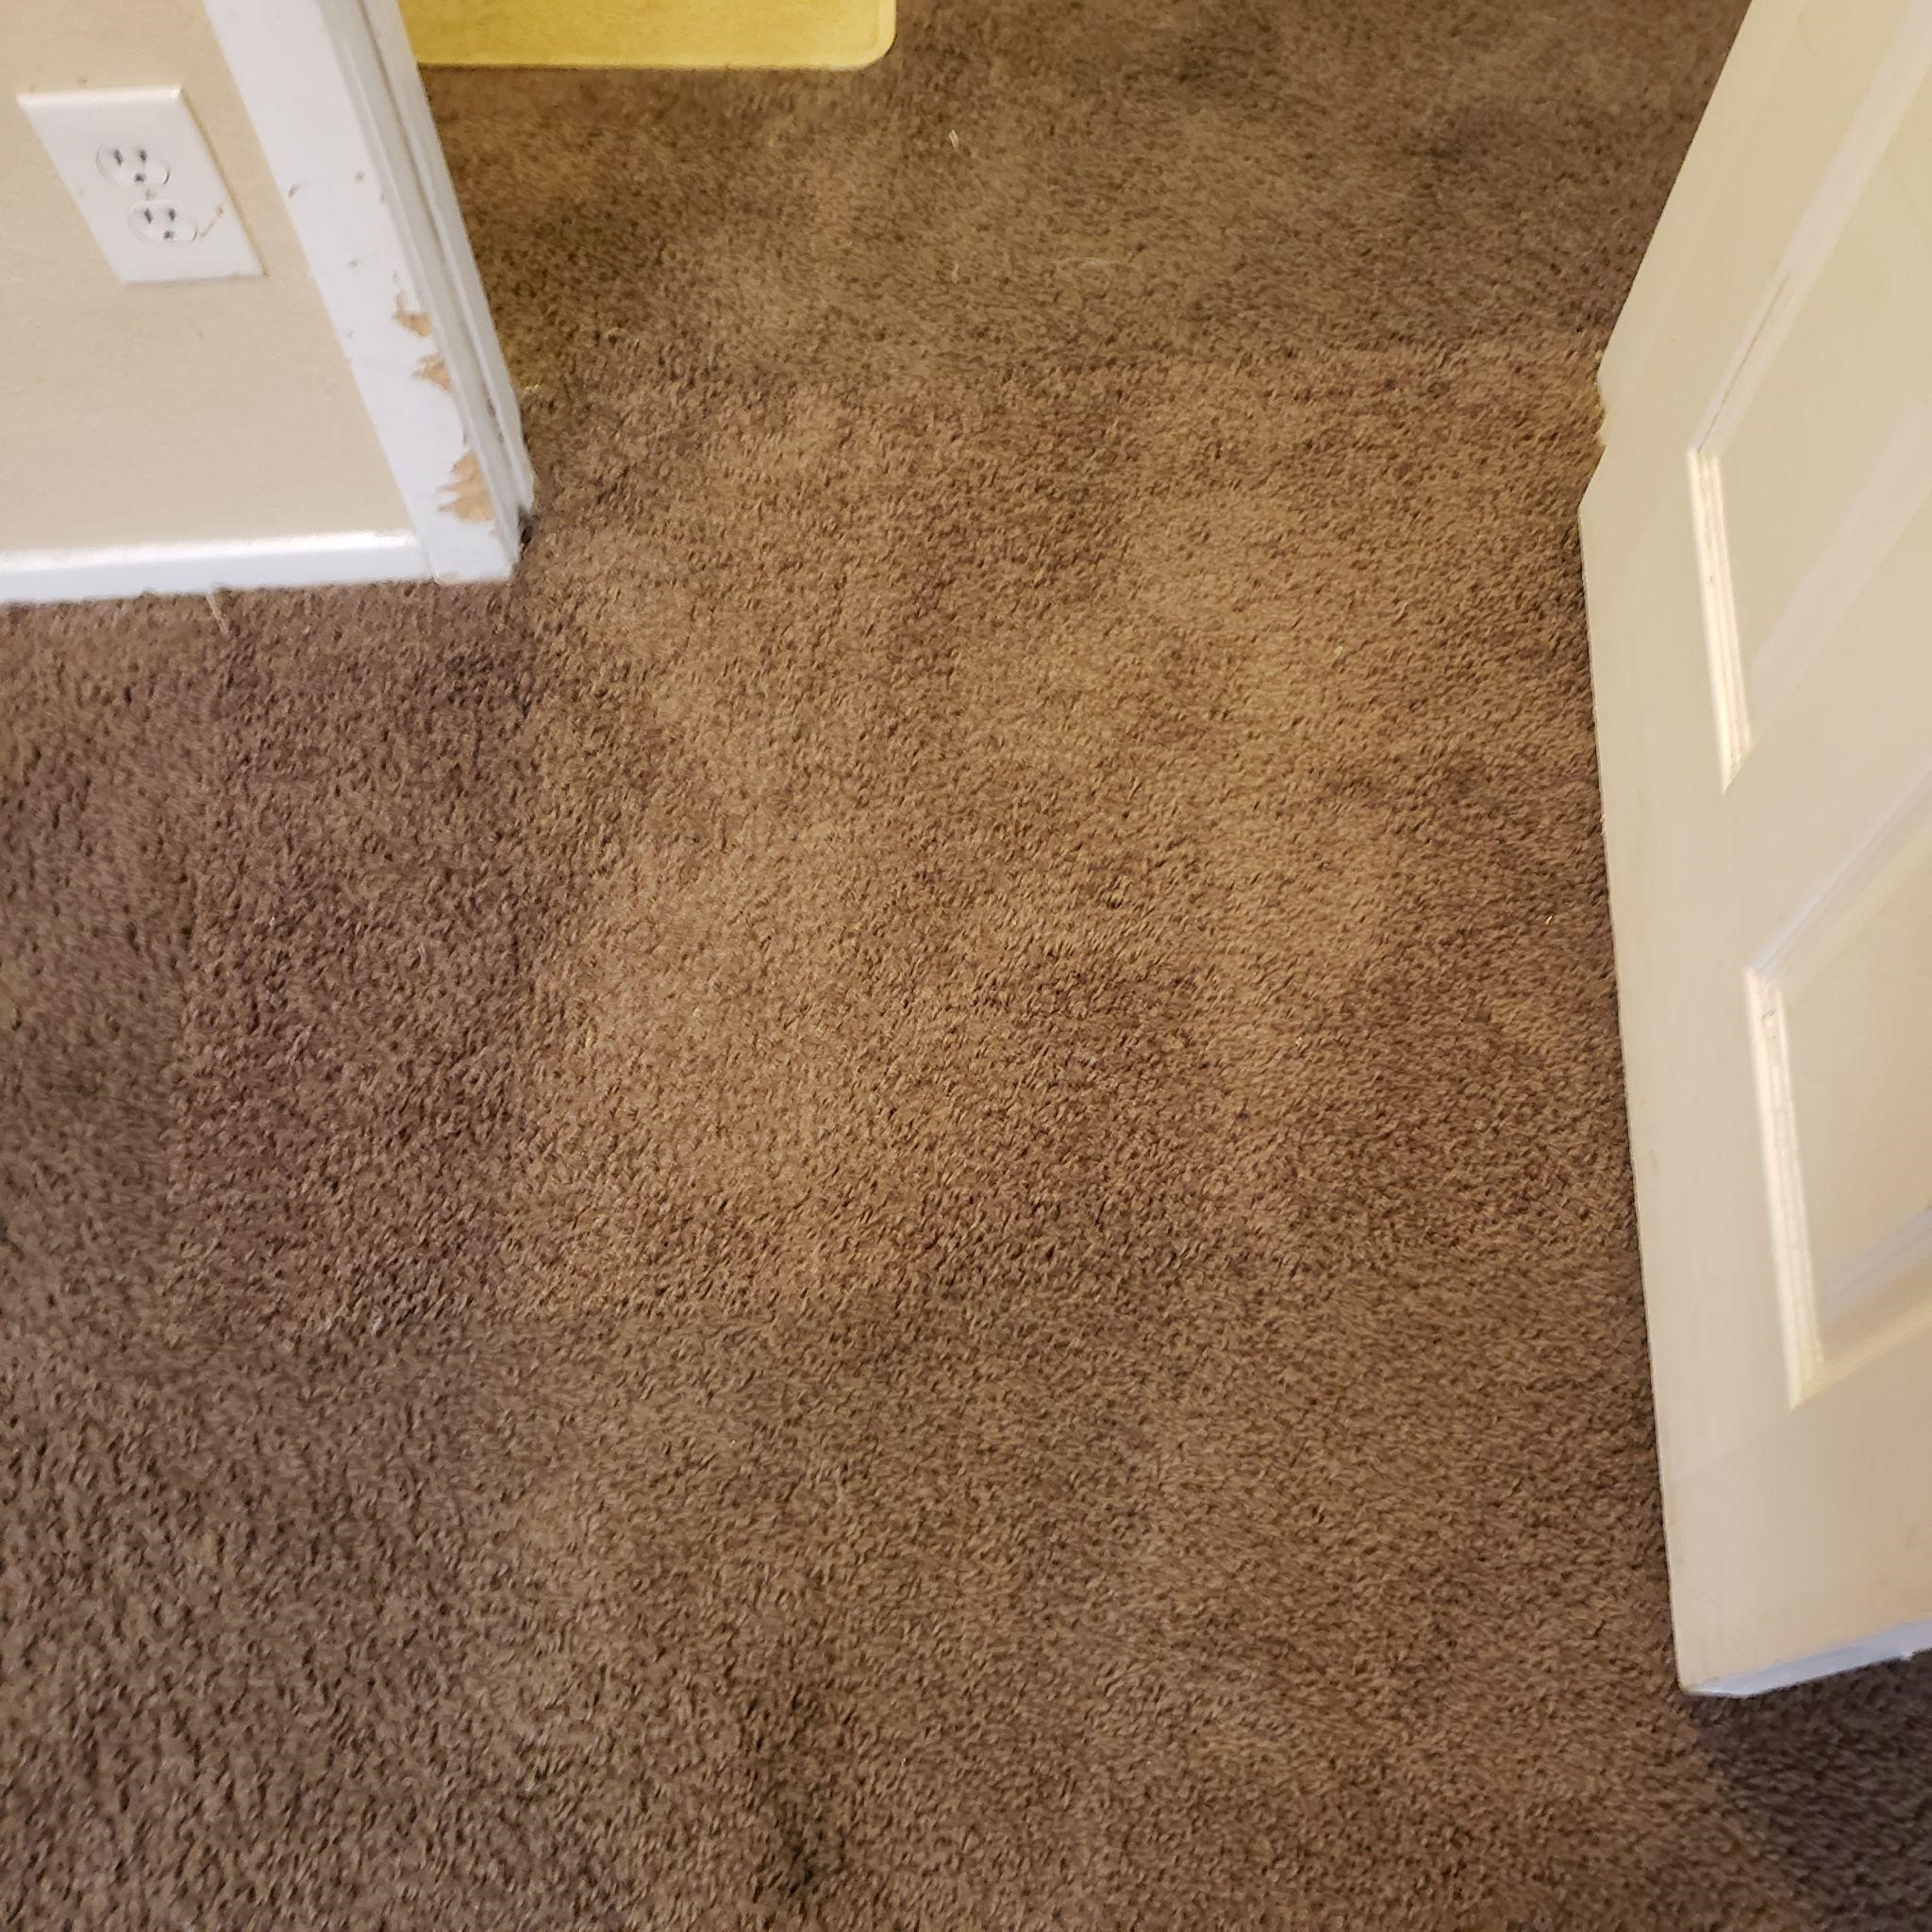 carpet repair before and after photos